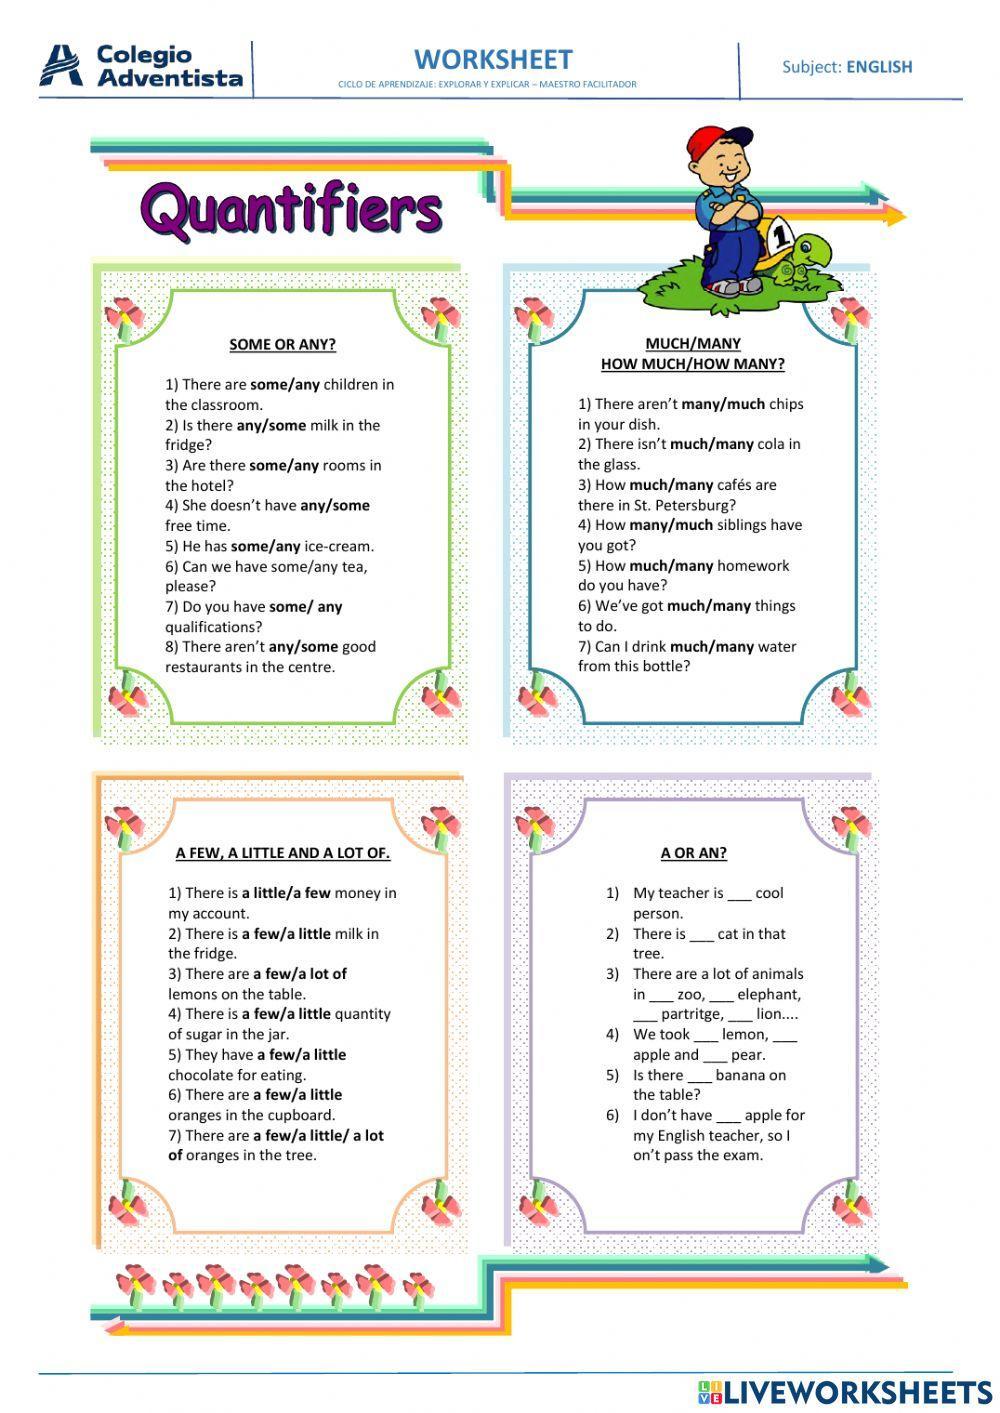 Quantifiers some, any, lot of, a few, a little listening